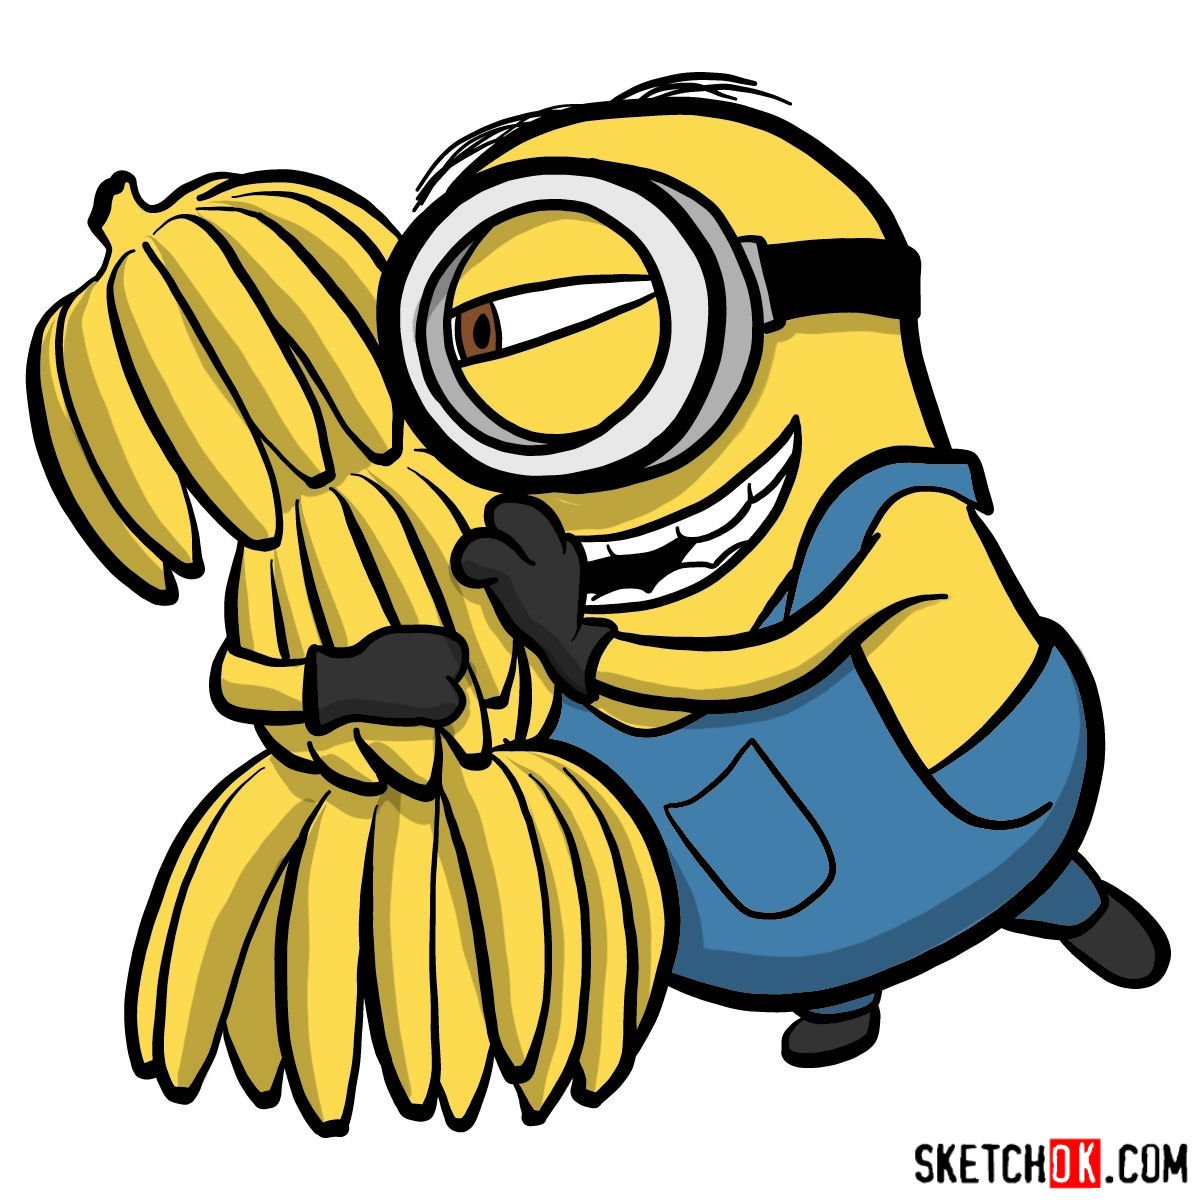 How to draw minion Lance with bananas